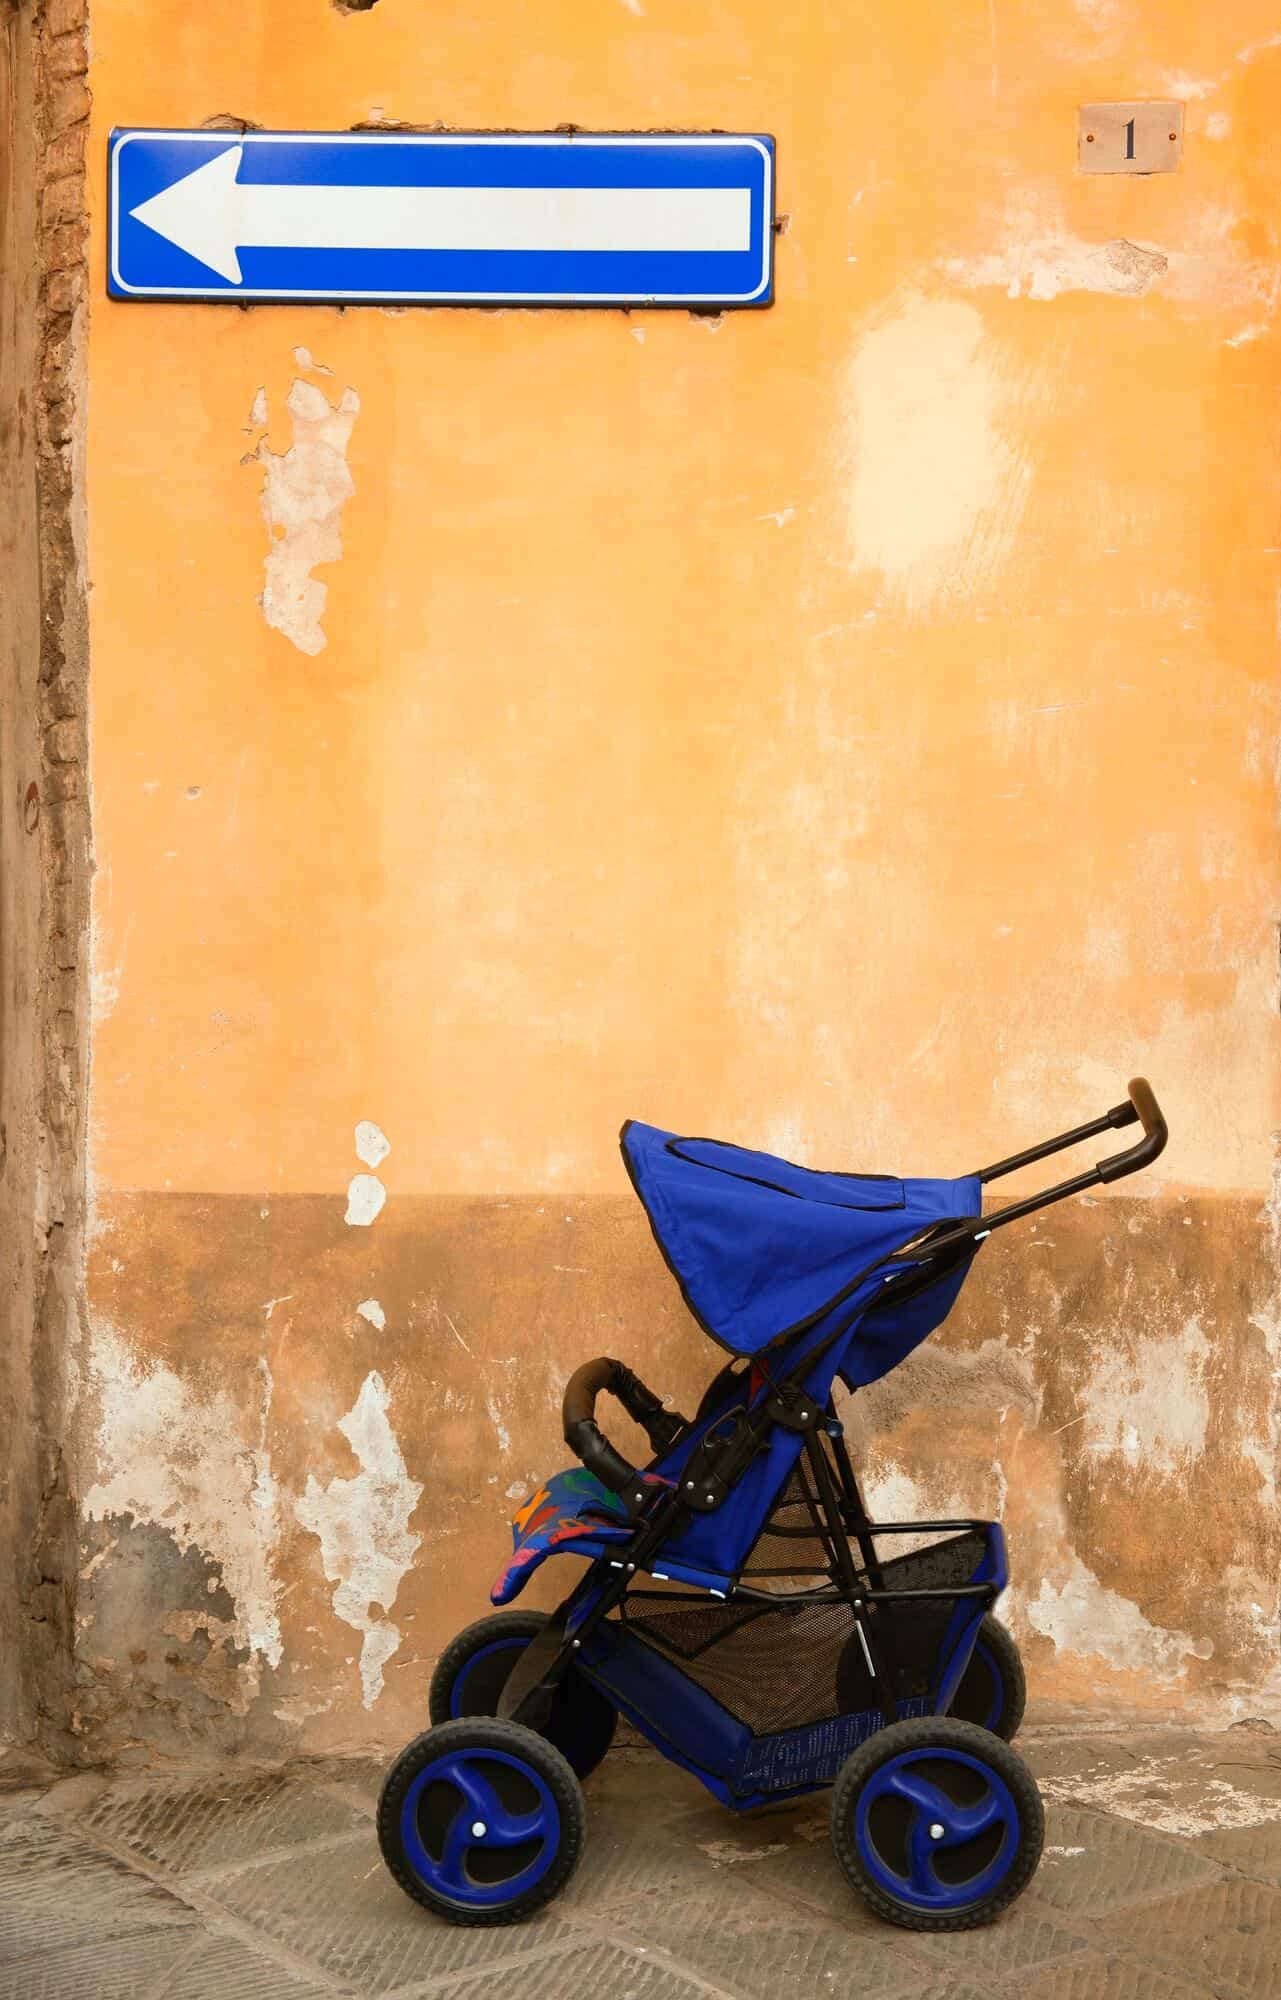 Using a stroller in Italy